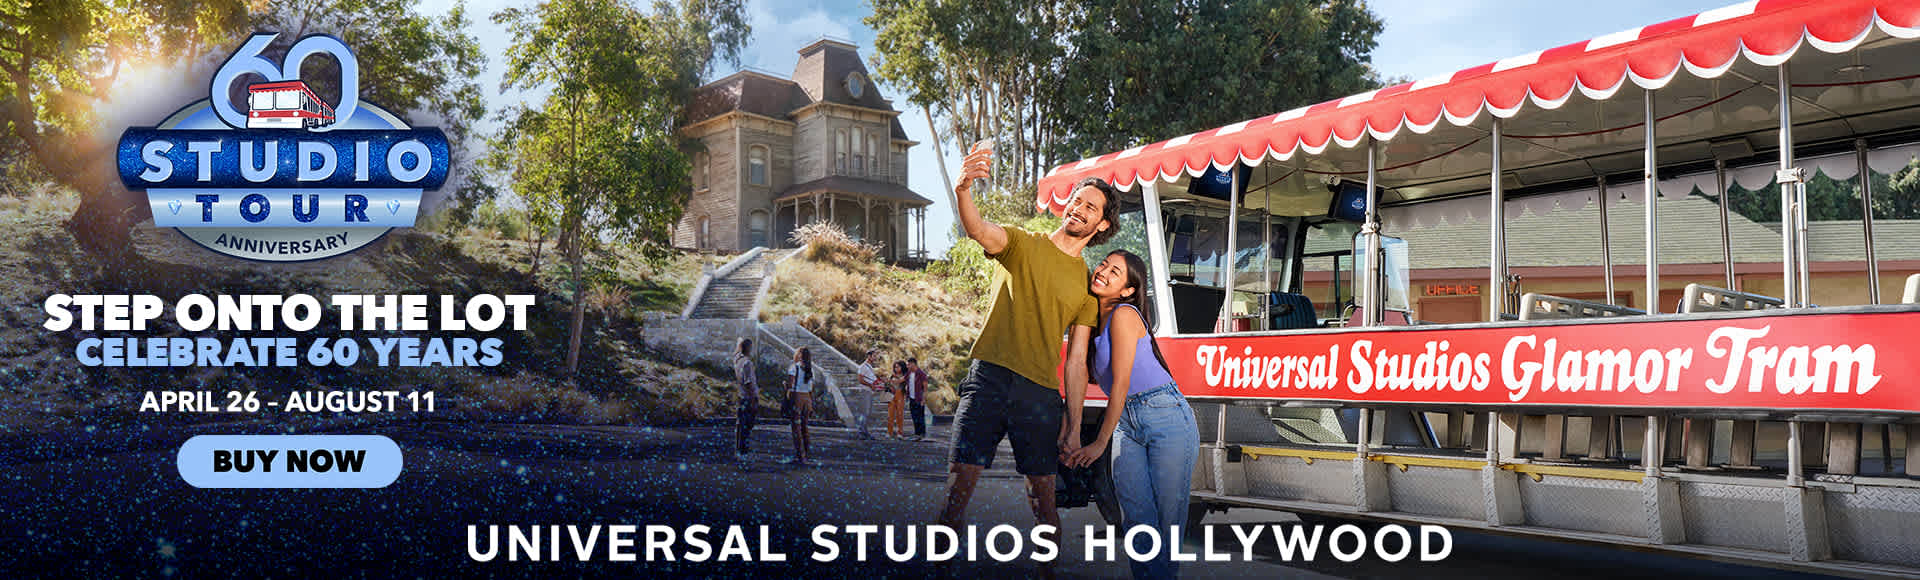 Universal Studios Hollywood Discounted Tickets